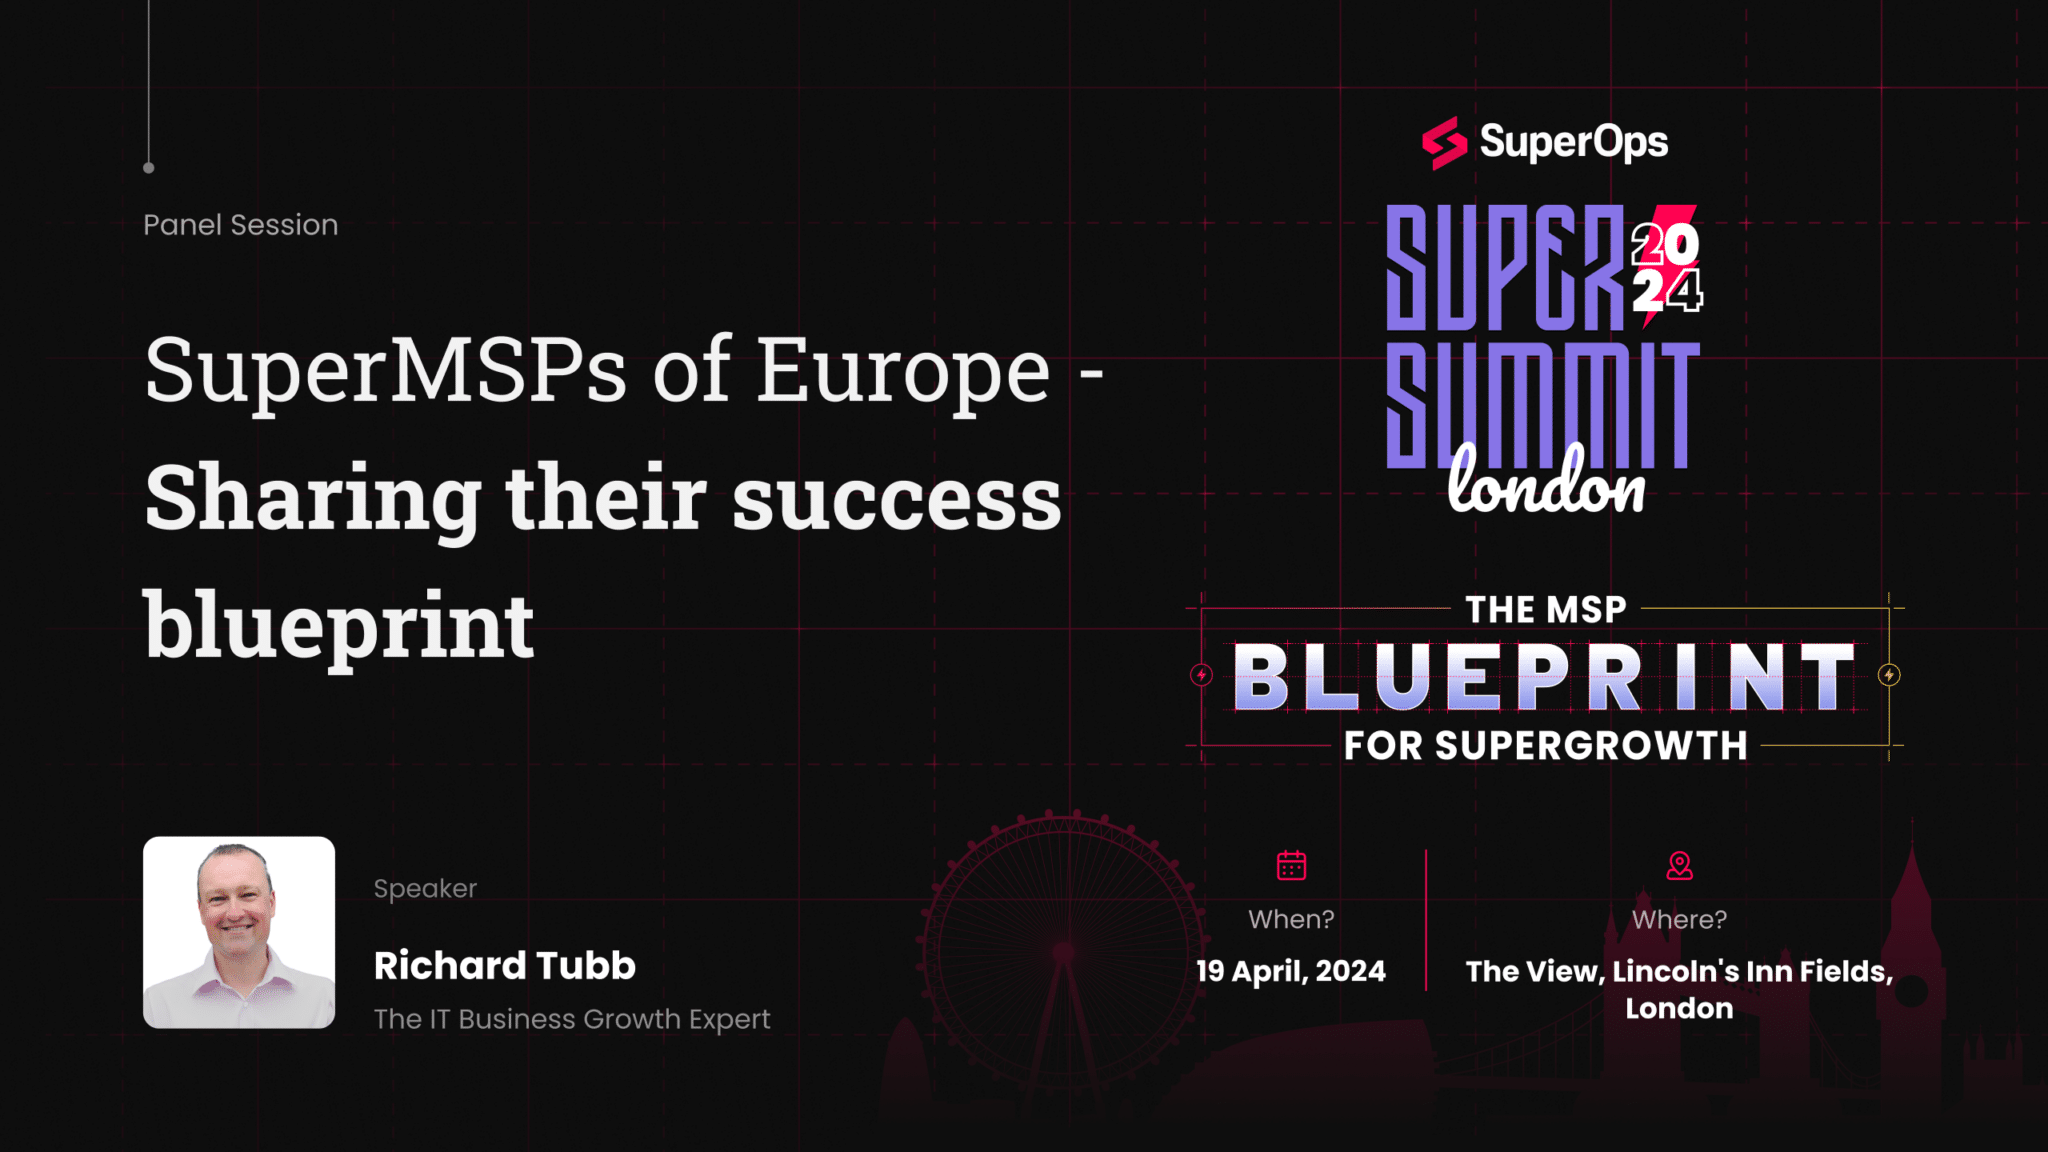 SuperOps SuperSummit 2024: The MSP Blueprint for SuperGrowth image